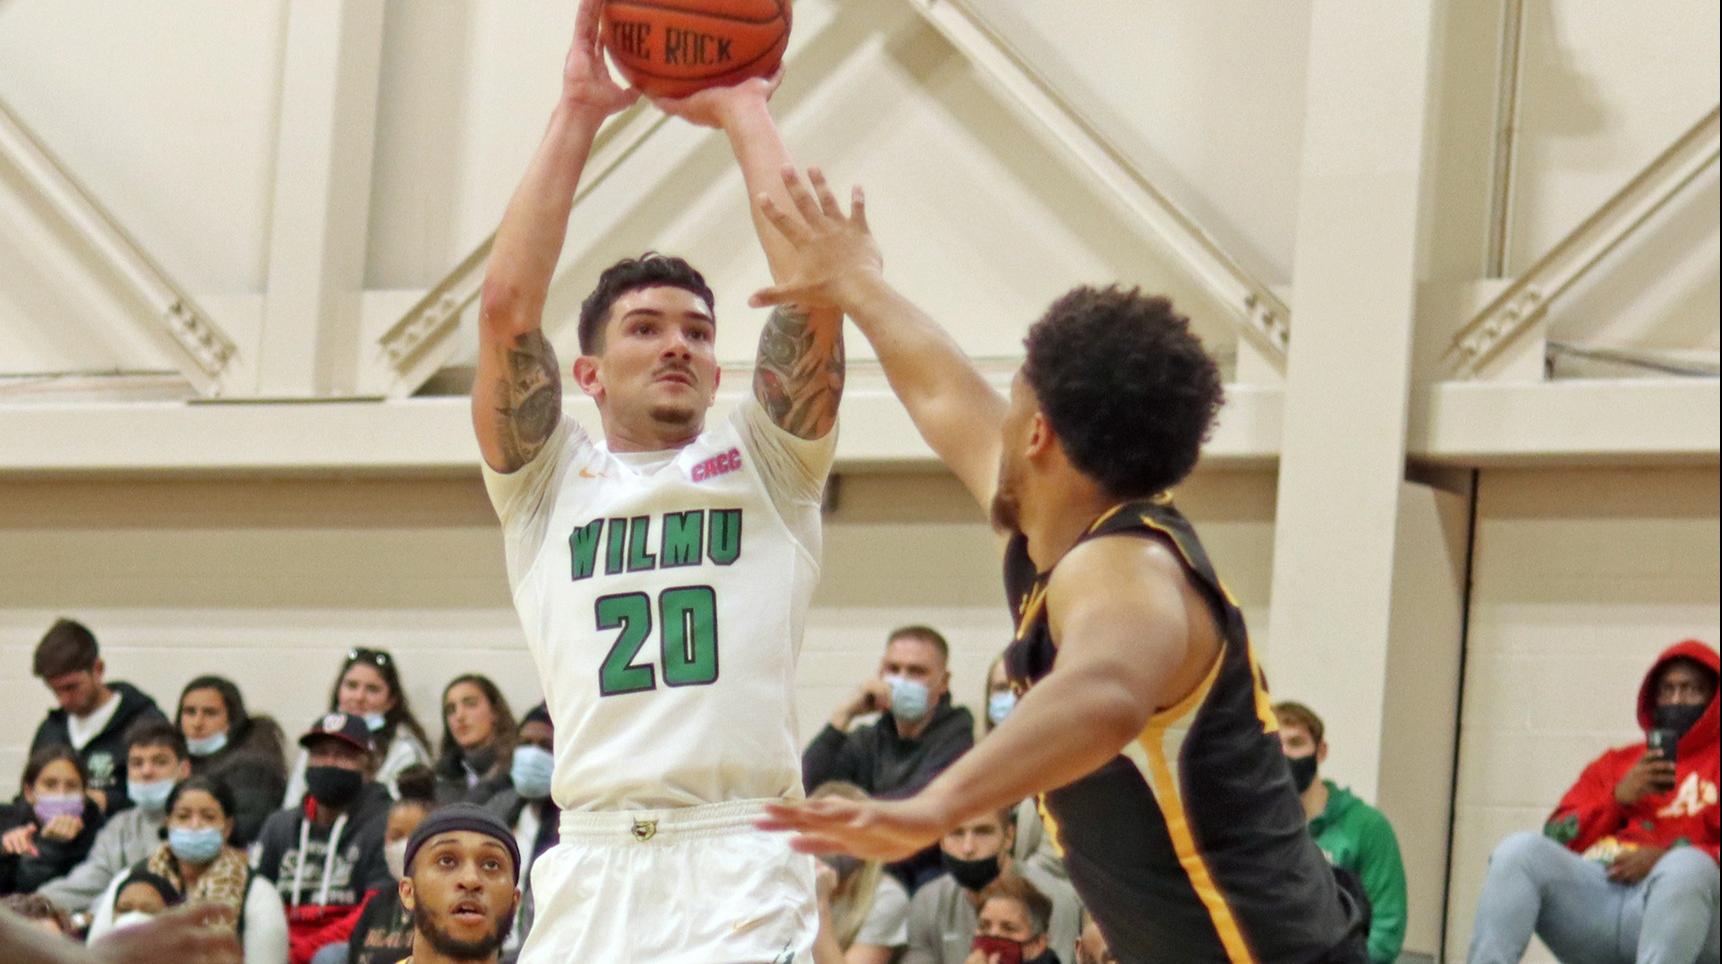 File photo of Danny Walsh who scored 16 points at Jefferson. Copyright 2021; Wilmington University. All rights reserved. Photo by Trudy Spence. November 20, 2021 vs. Bowie State.